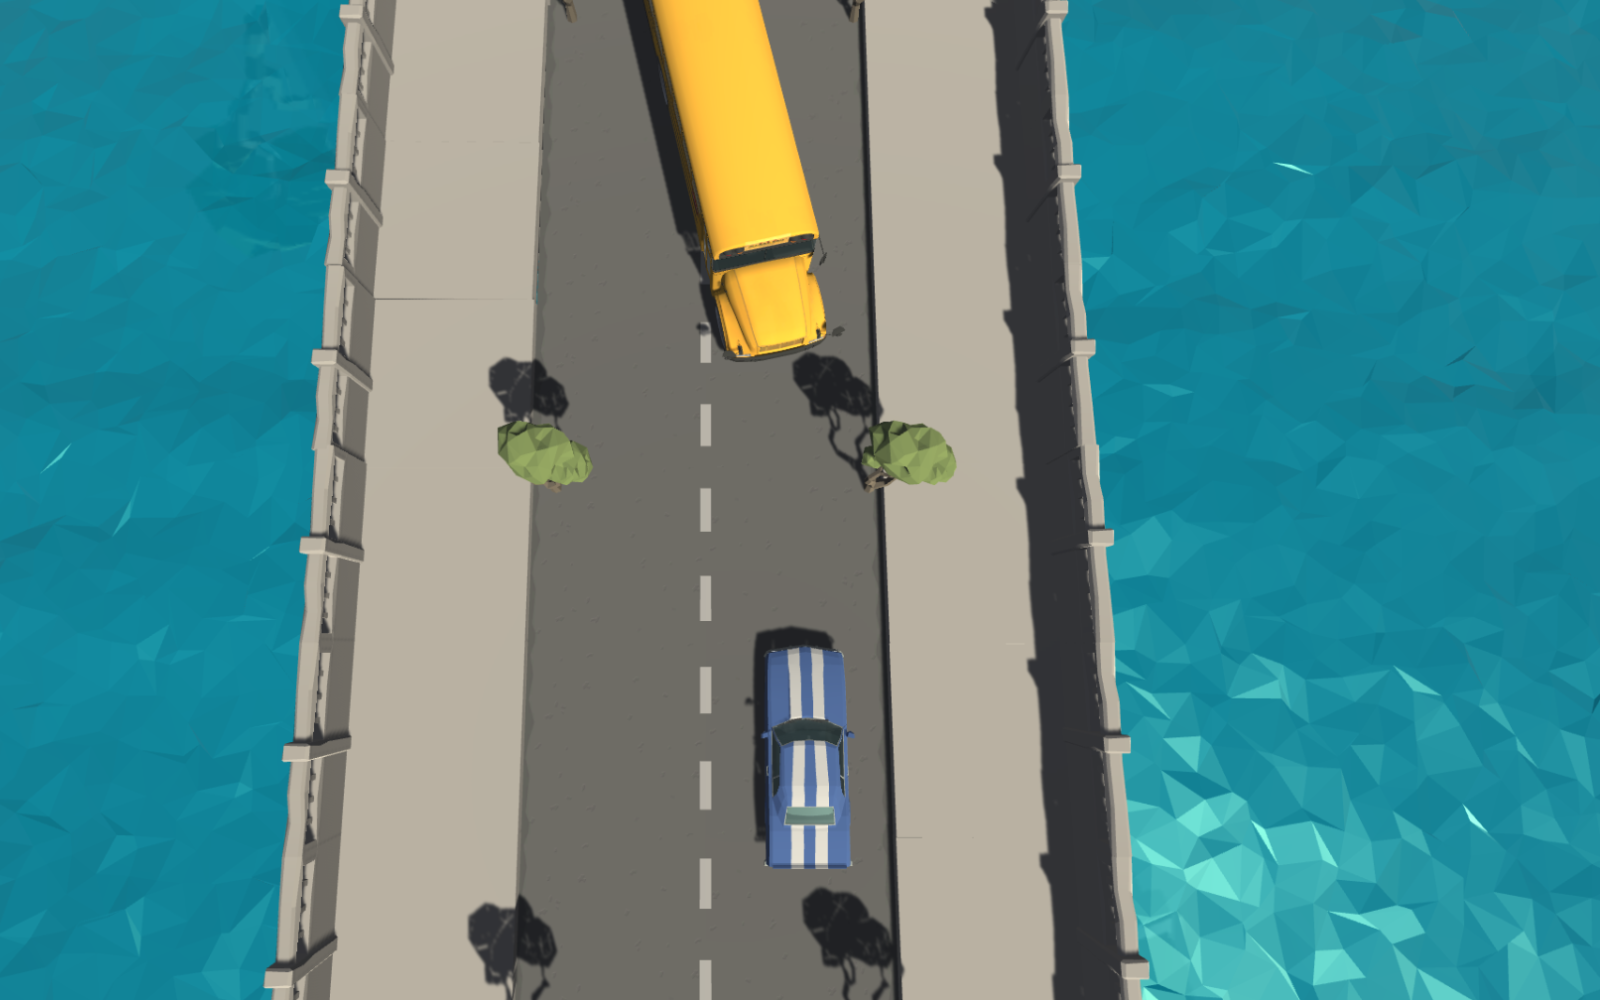  The graphic shows two vehicles driving towards each other on a bridge